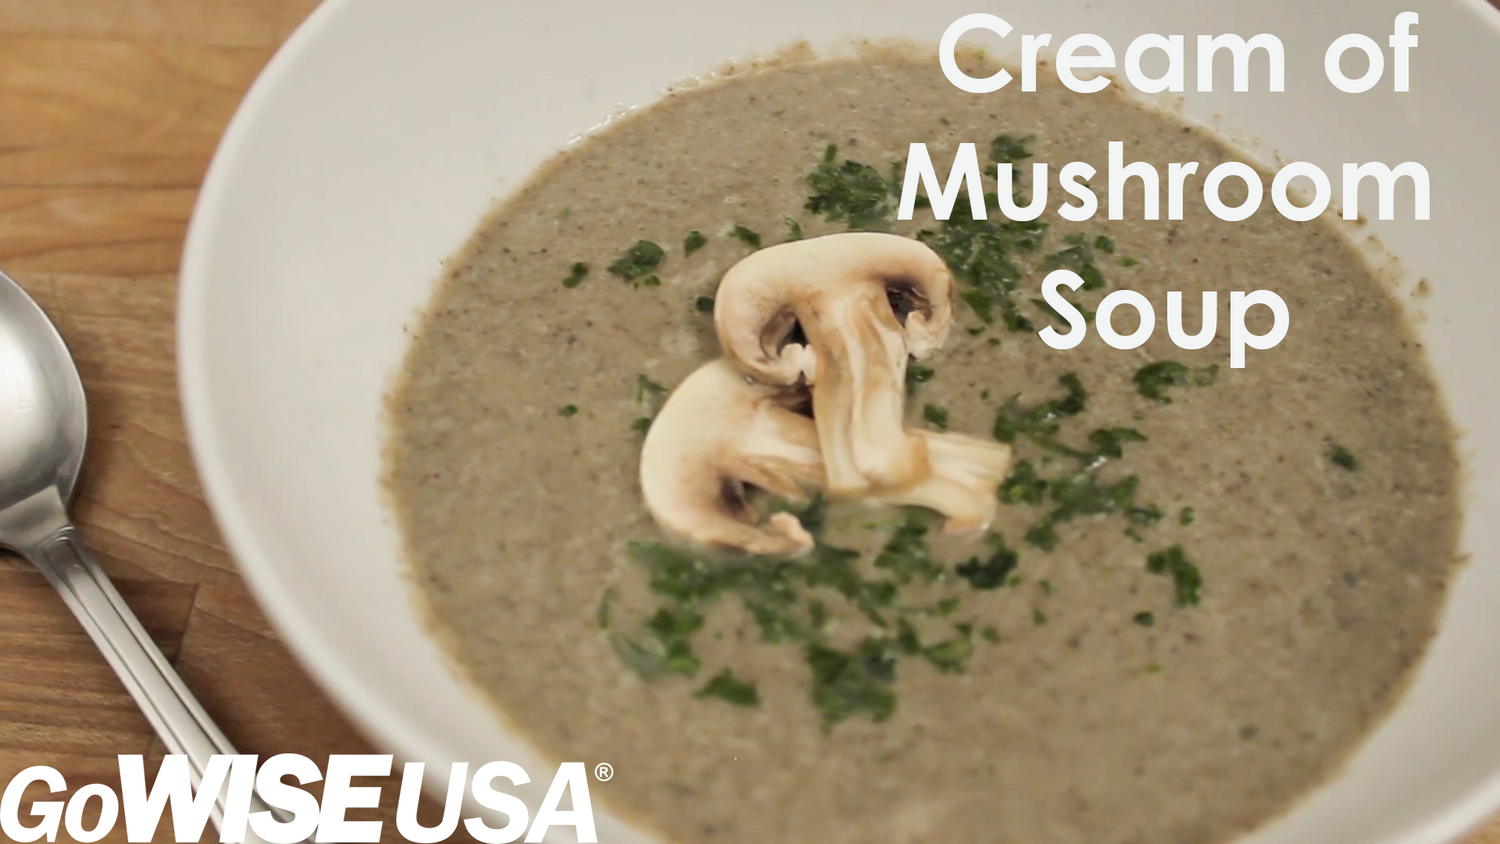 Cream of Mushroom Soup Made in the Heated Blender